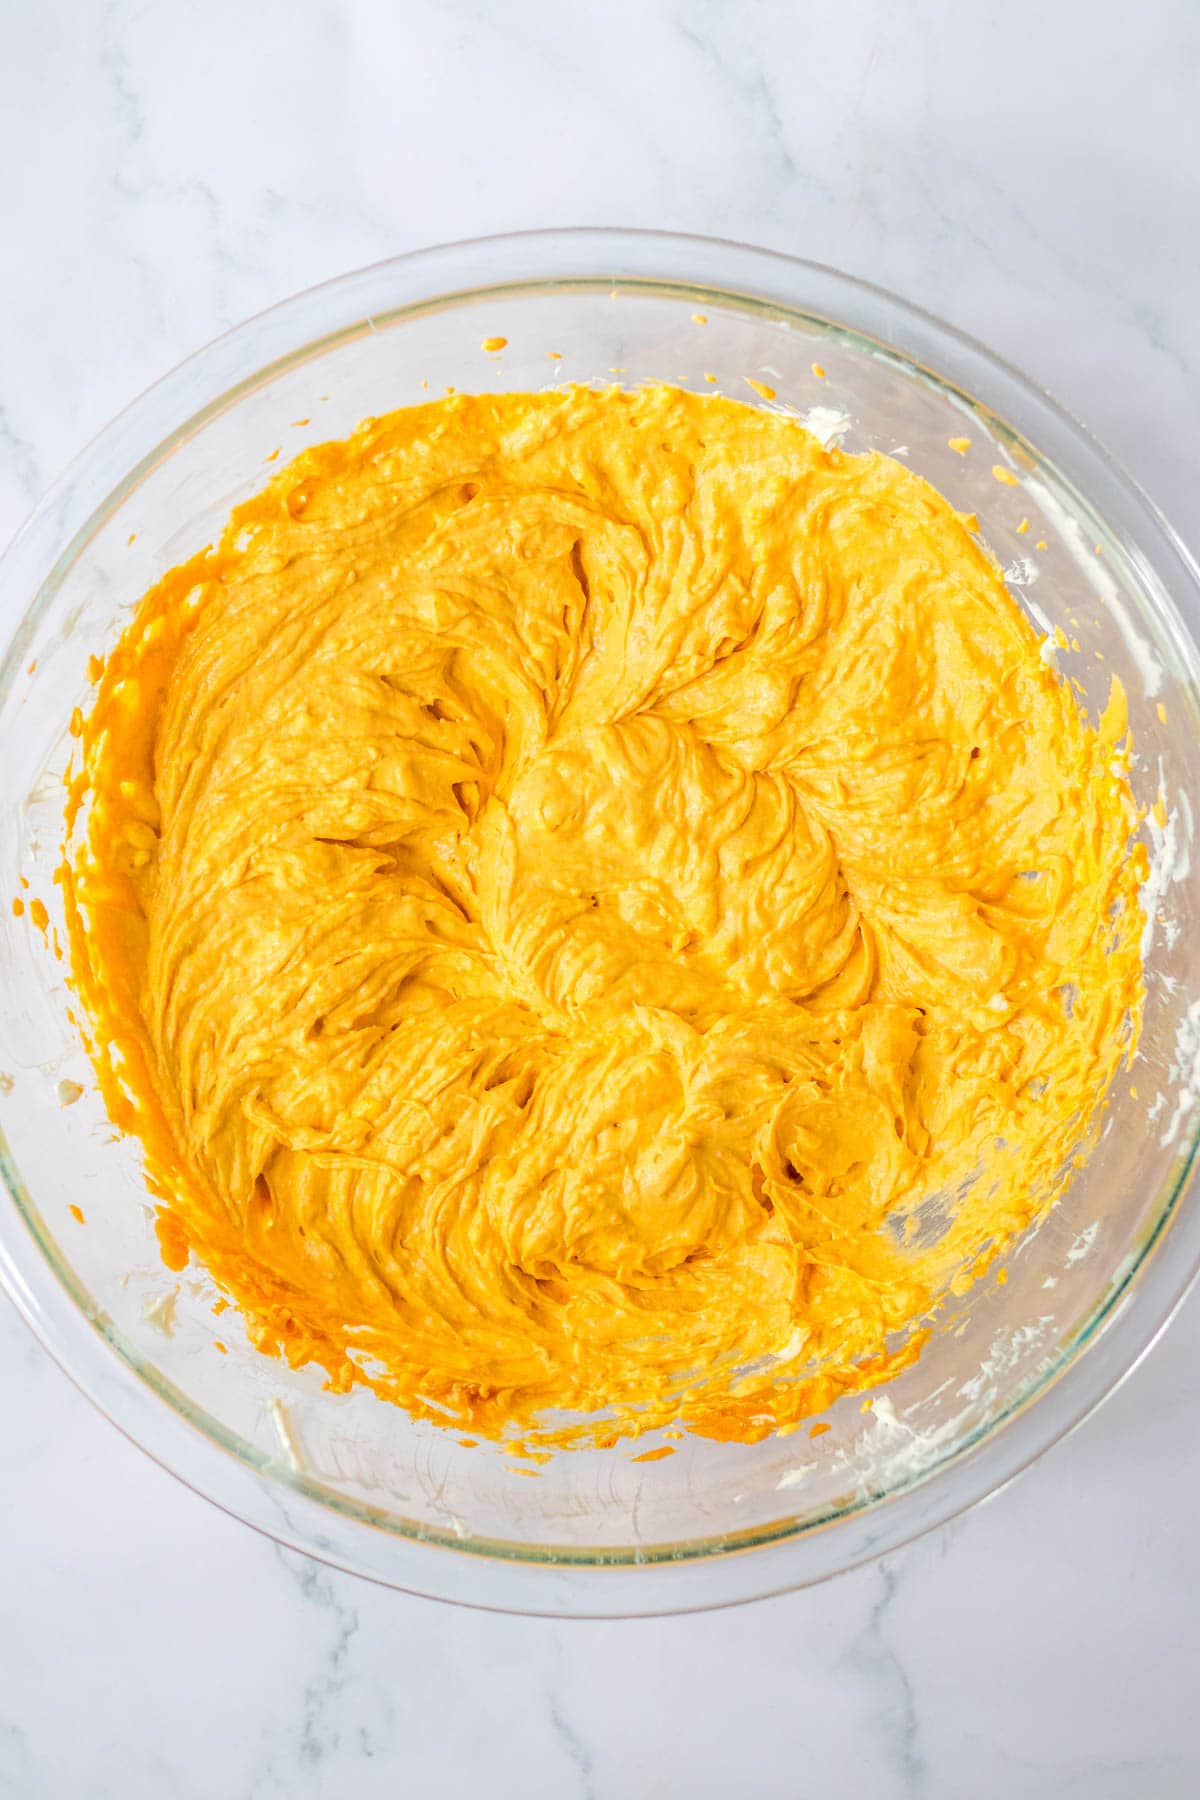 Pumpkin puree and cream cheese mixed together